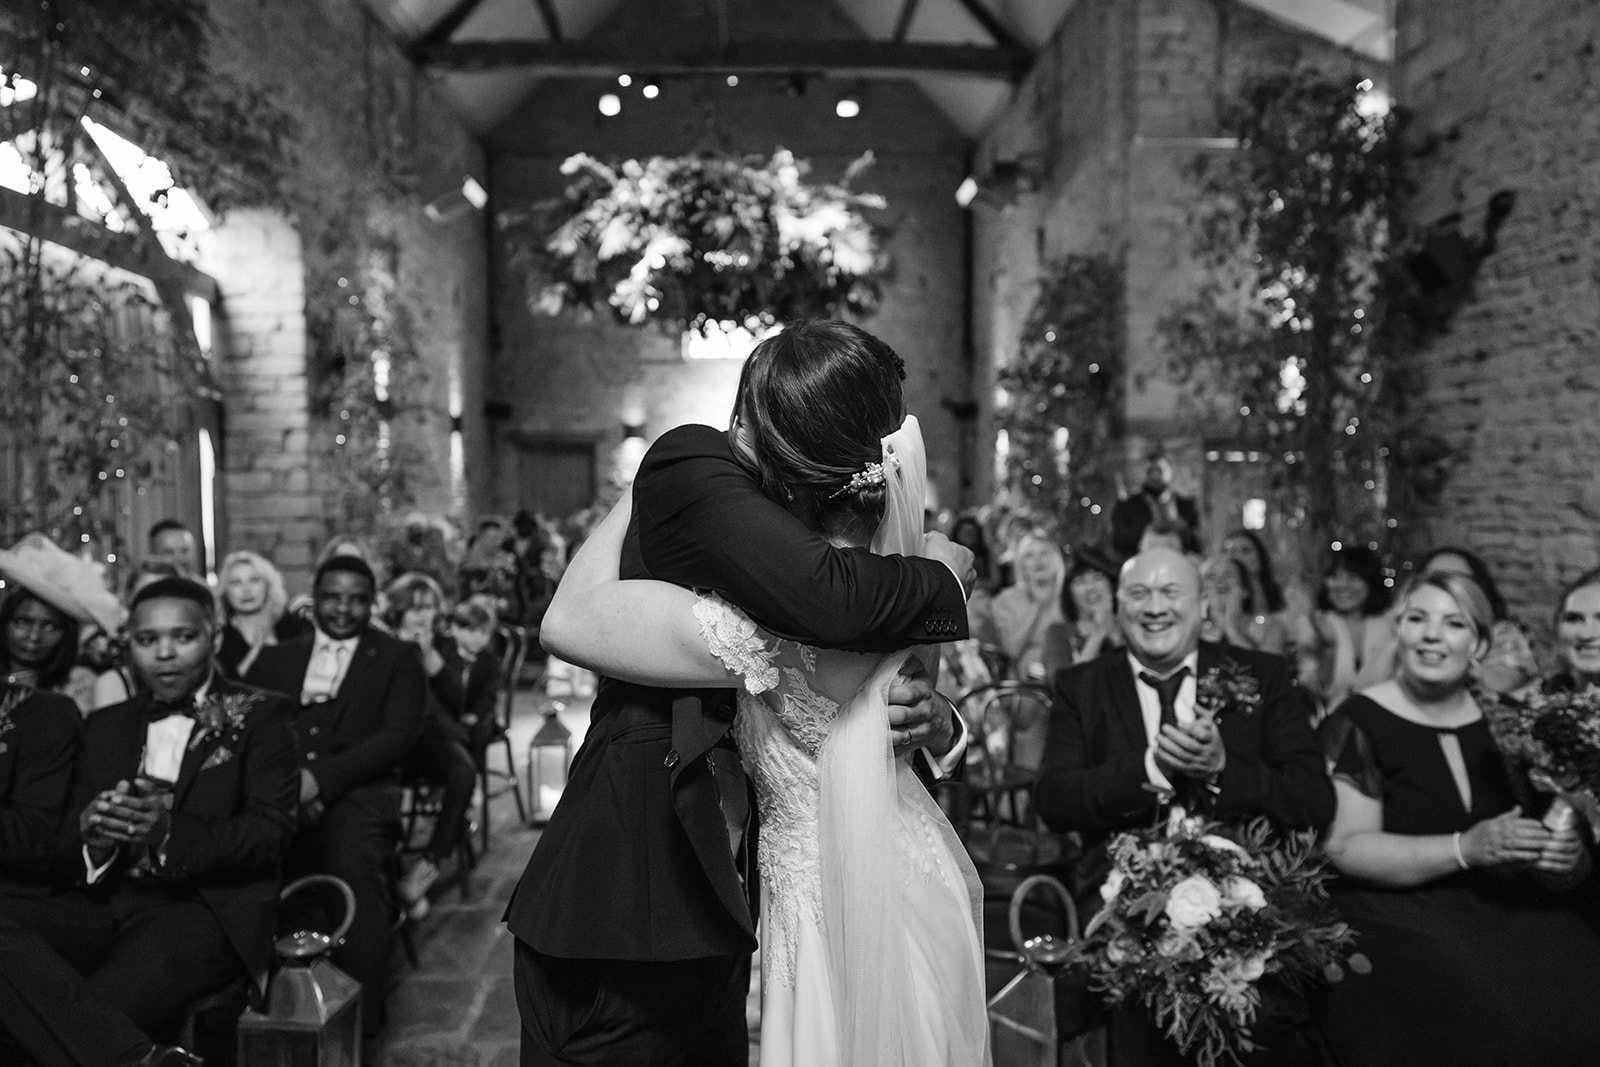 Black and white photo of bride and groom embracing